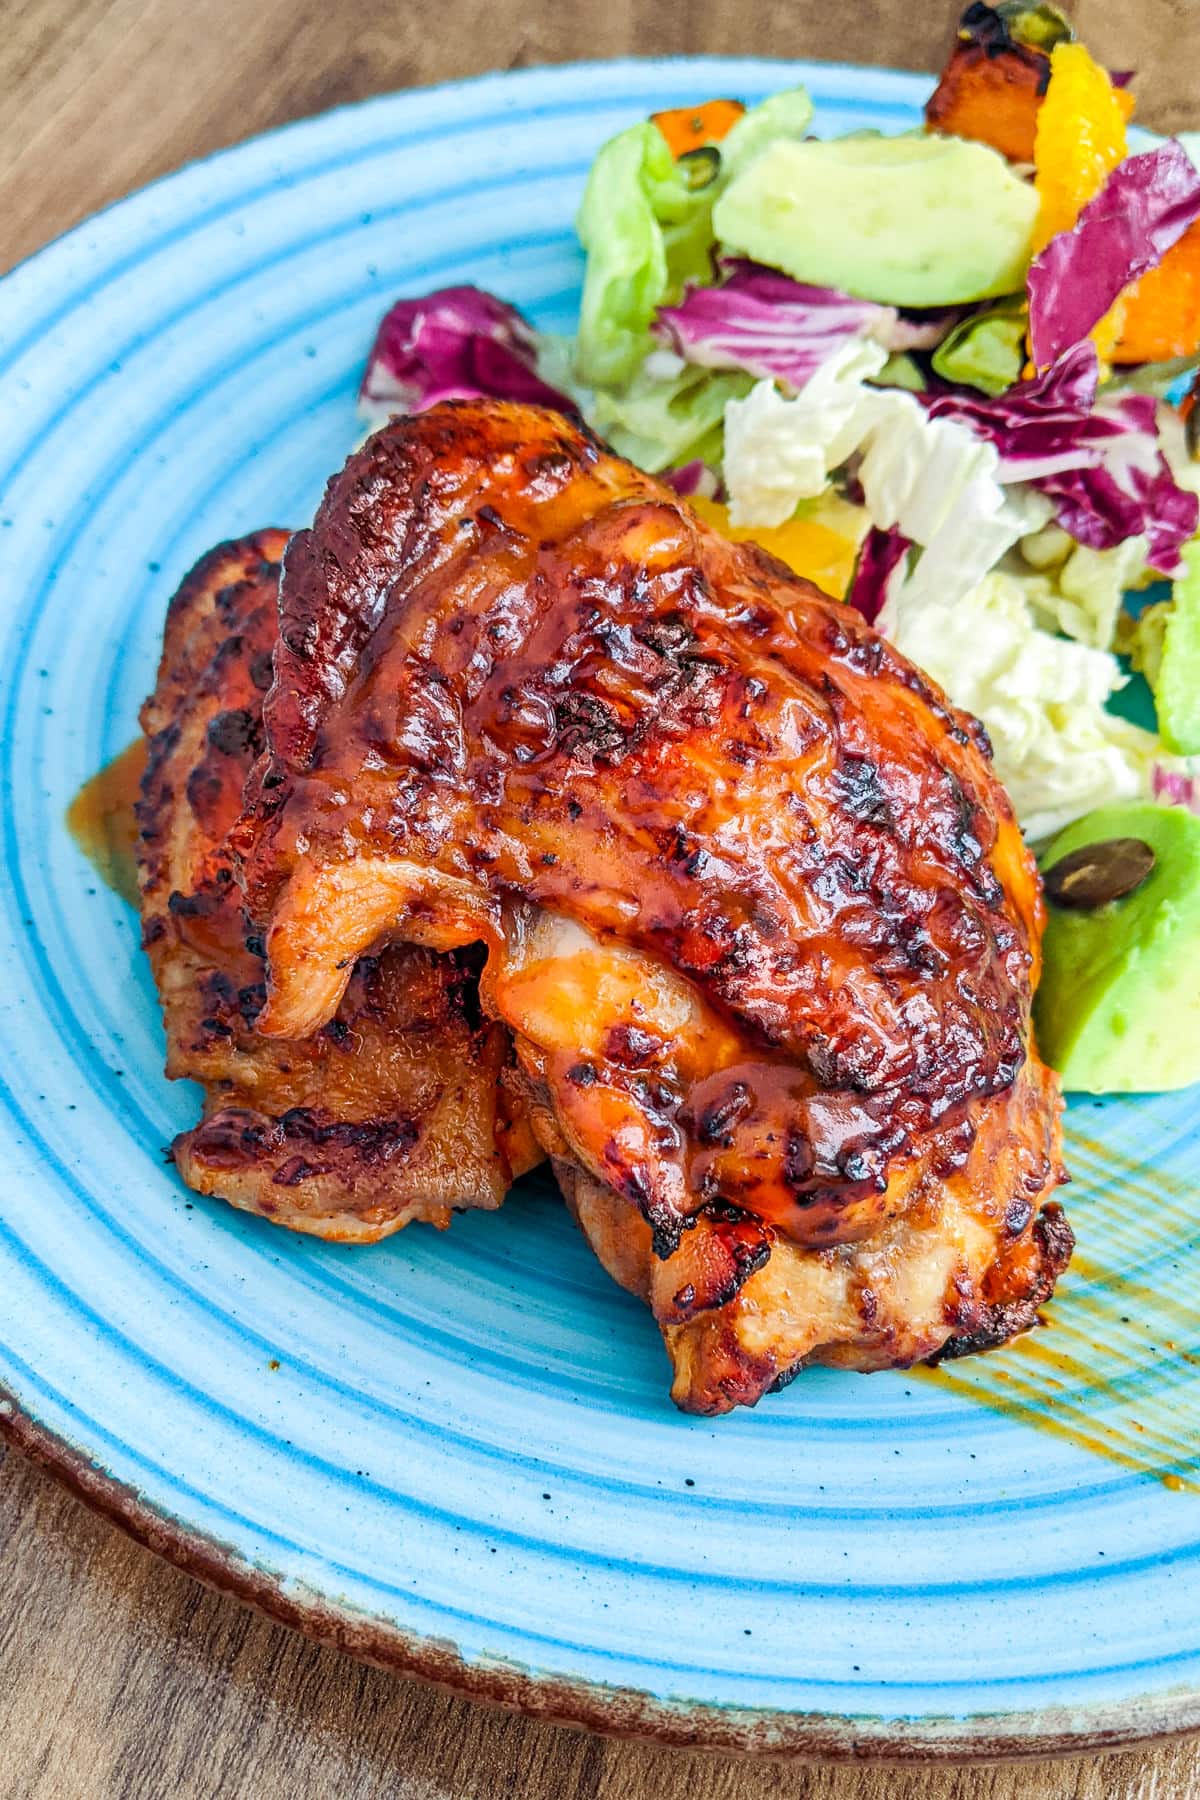 Roasted chicken thighs marinated in buffalo sauce and served with green salad.